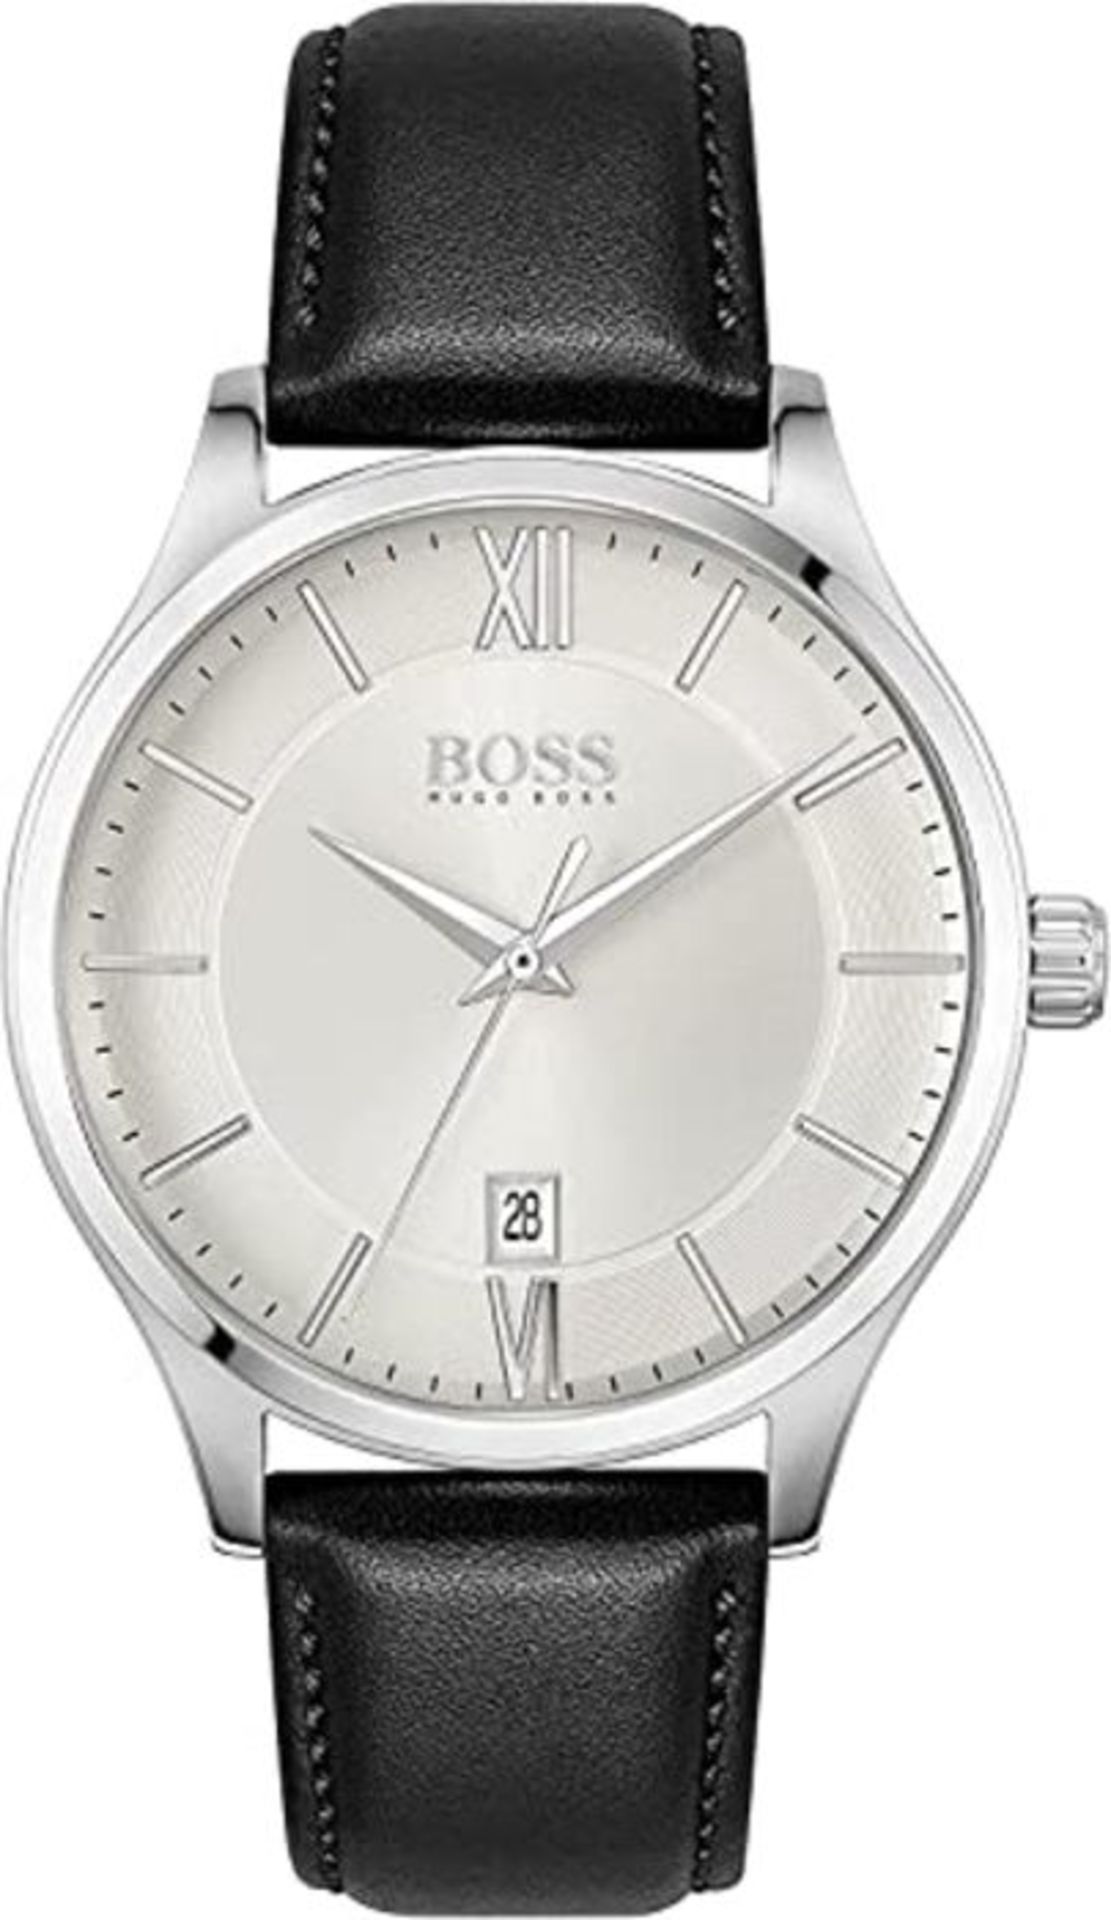 RRP £120.00 BOSS Men Analog Quartz Watch with Leather Strap 1513893